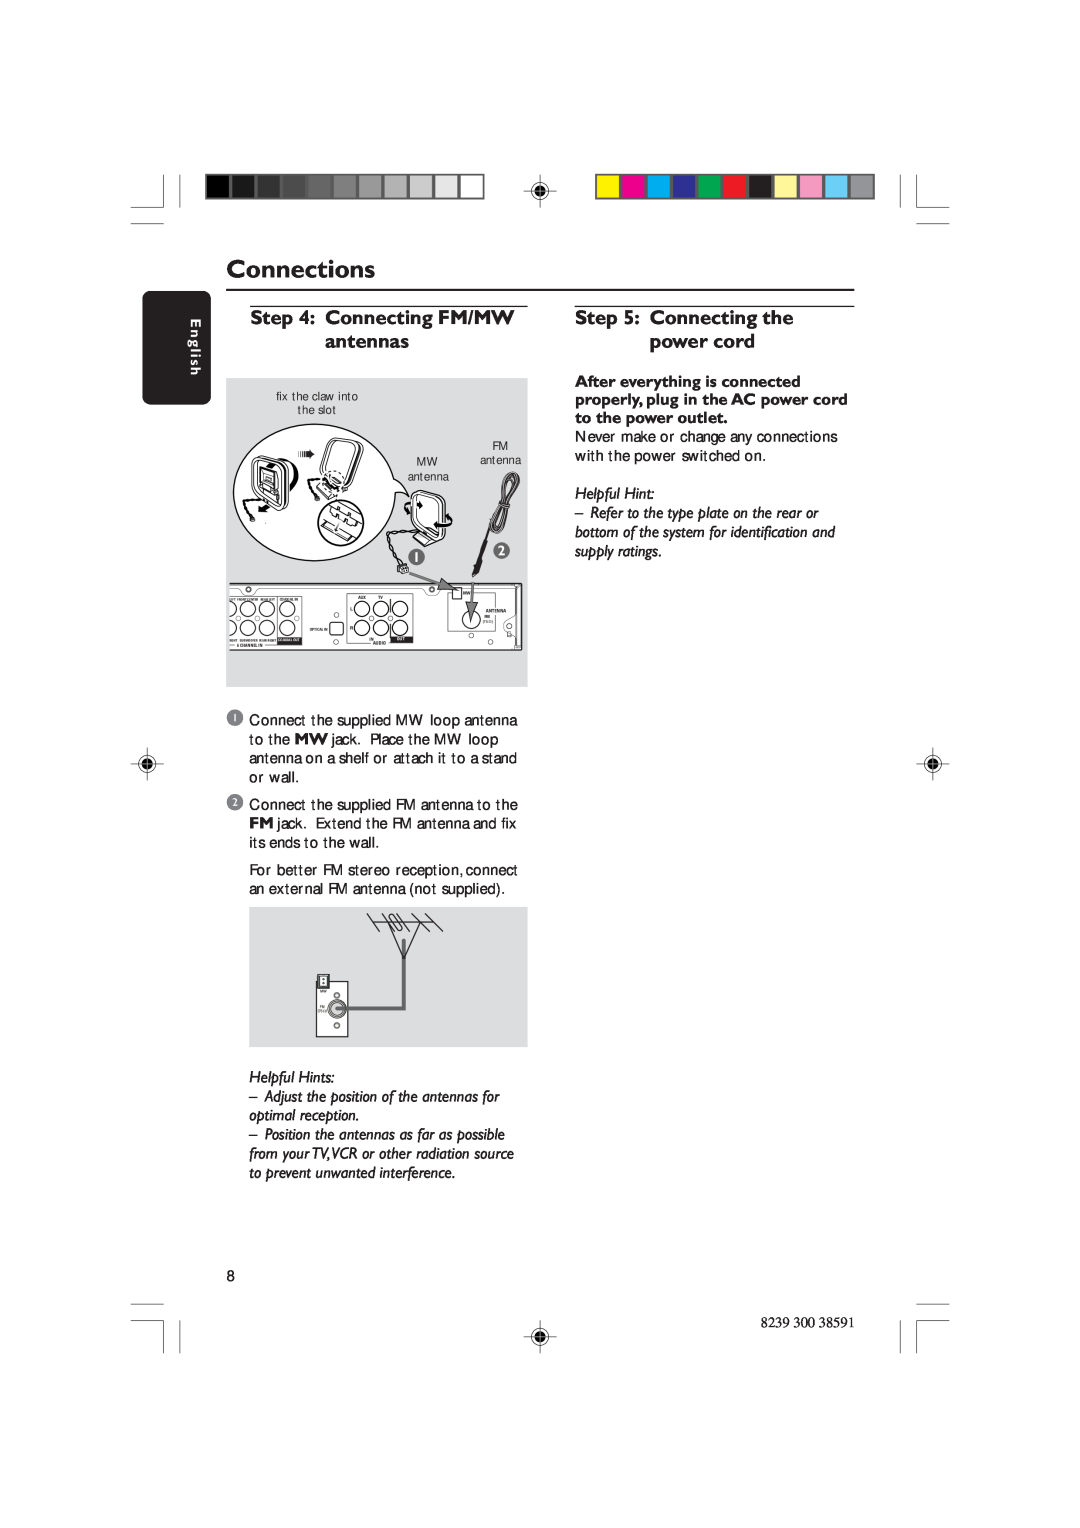 Philips HTR5000 user manual Connecting FM/MW antennas, Connecting the power cord, Connections, Helpful Hints 